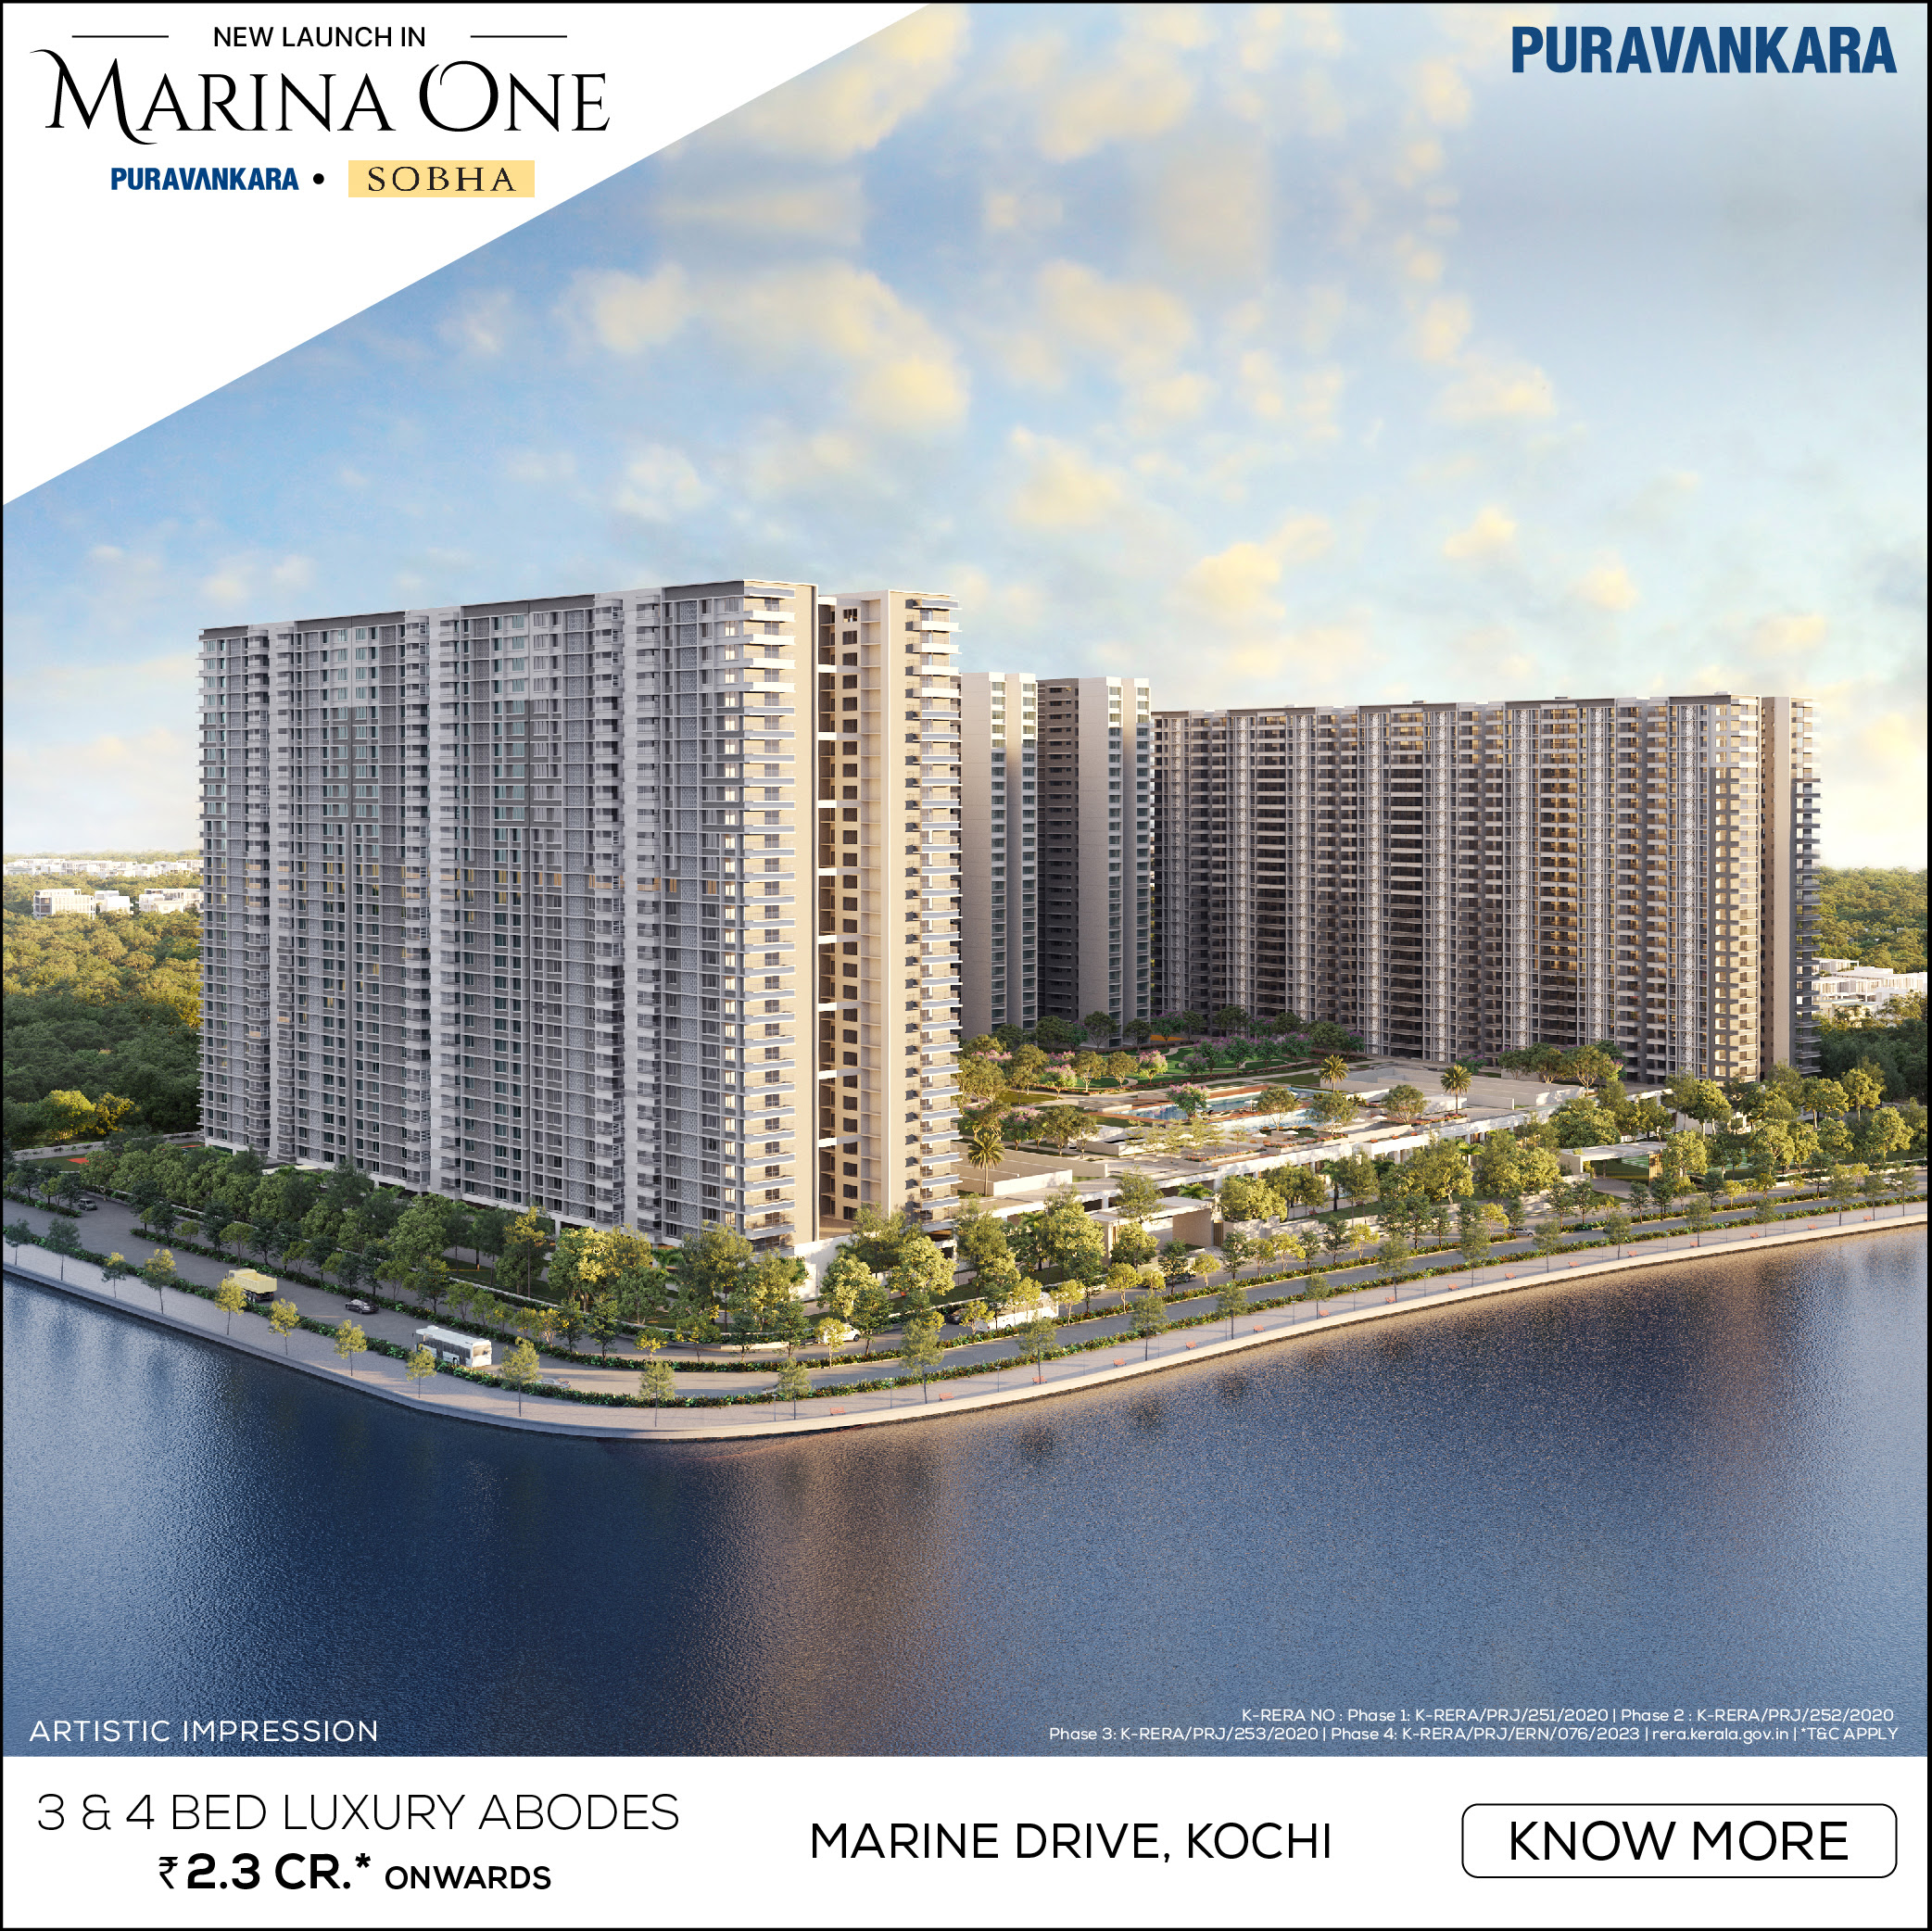 Waterfront residential project Rs 2.3 Cr at Purva Marina One, Kochi